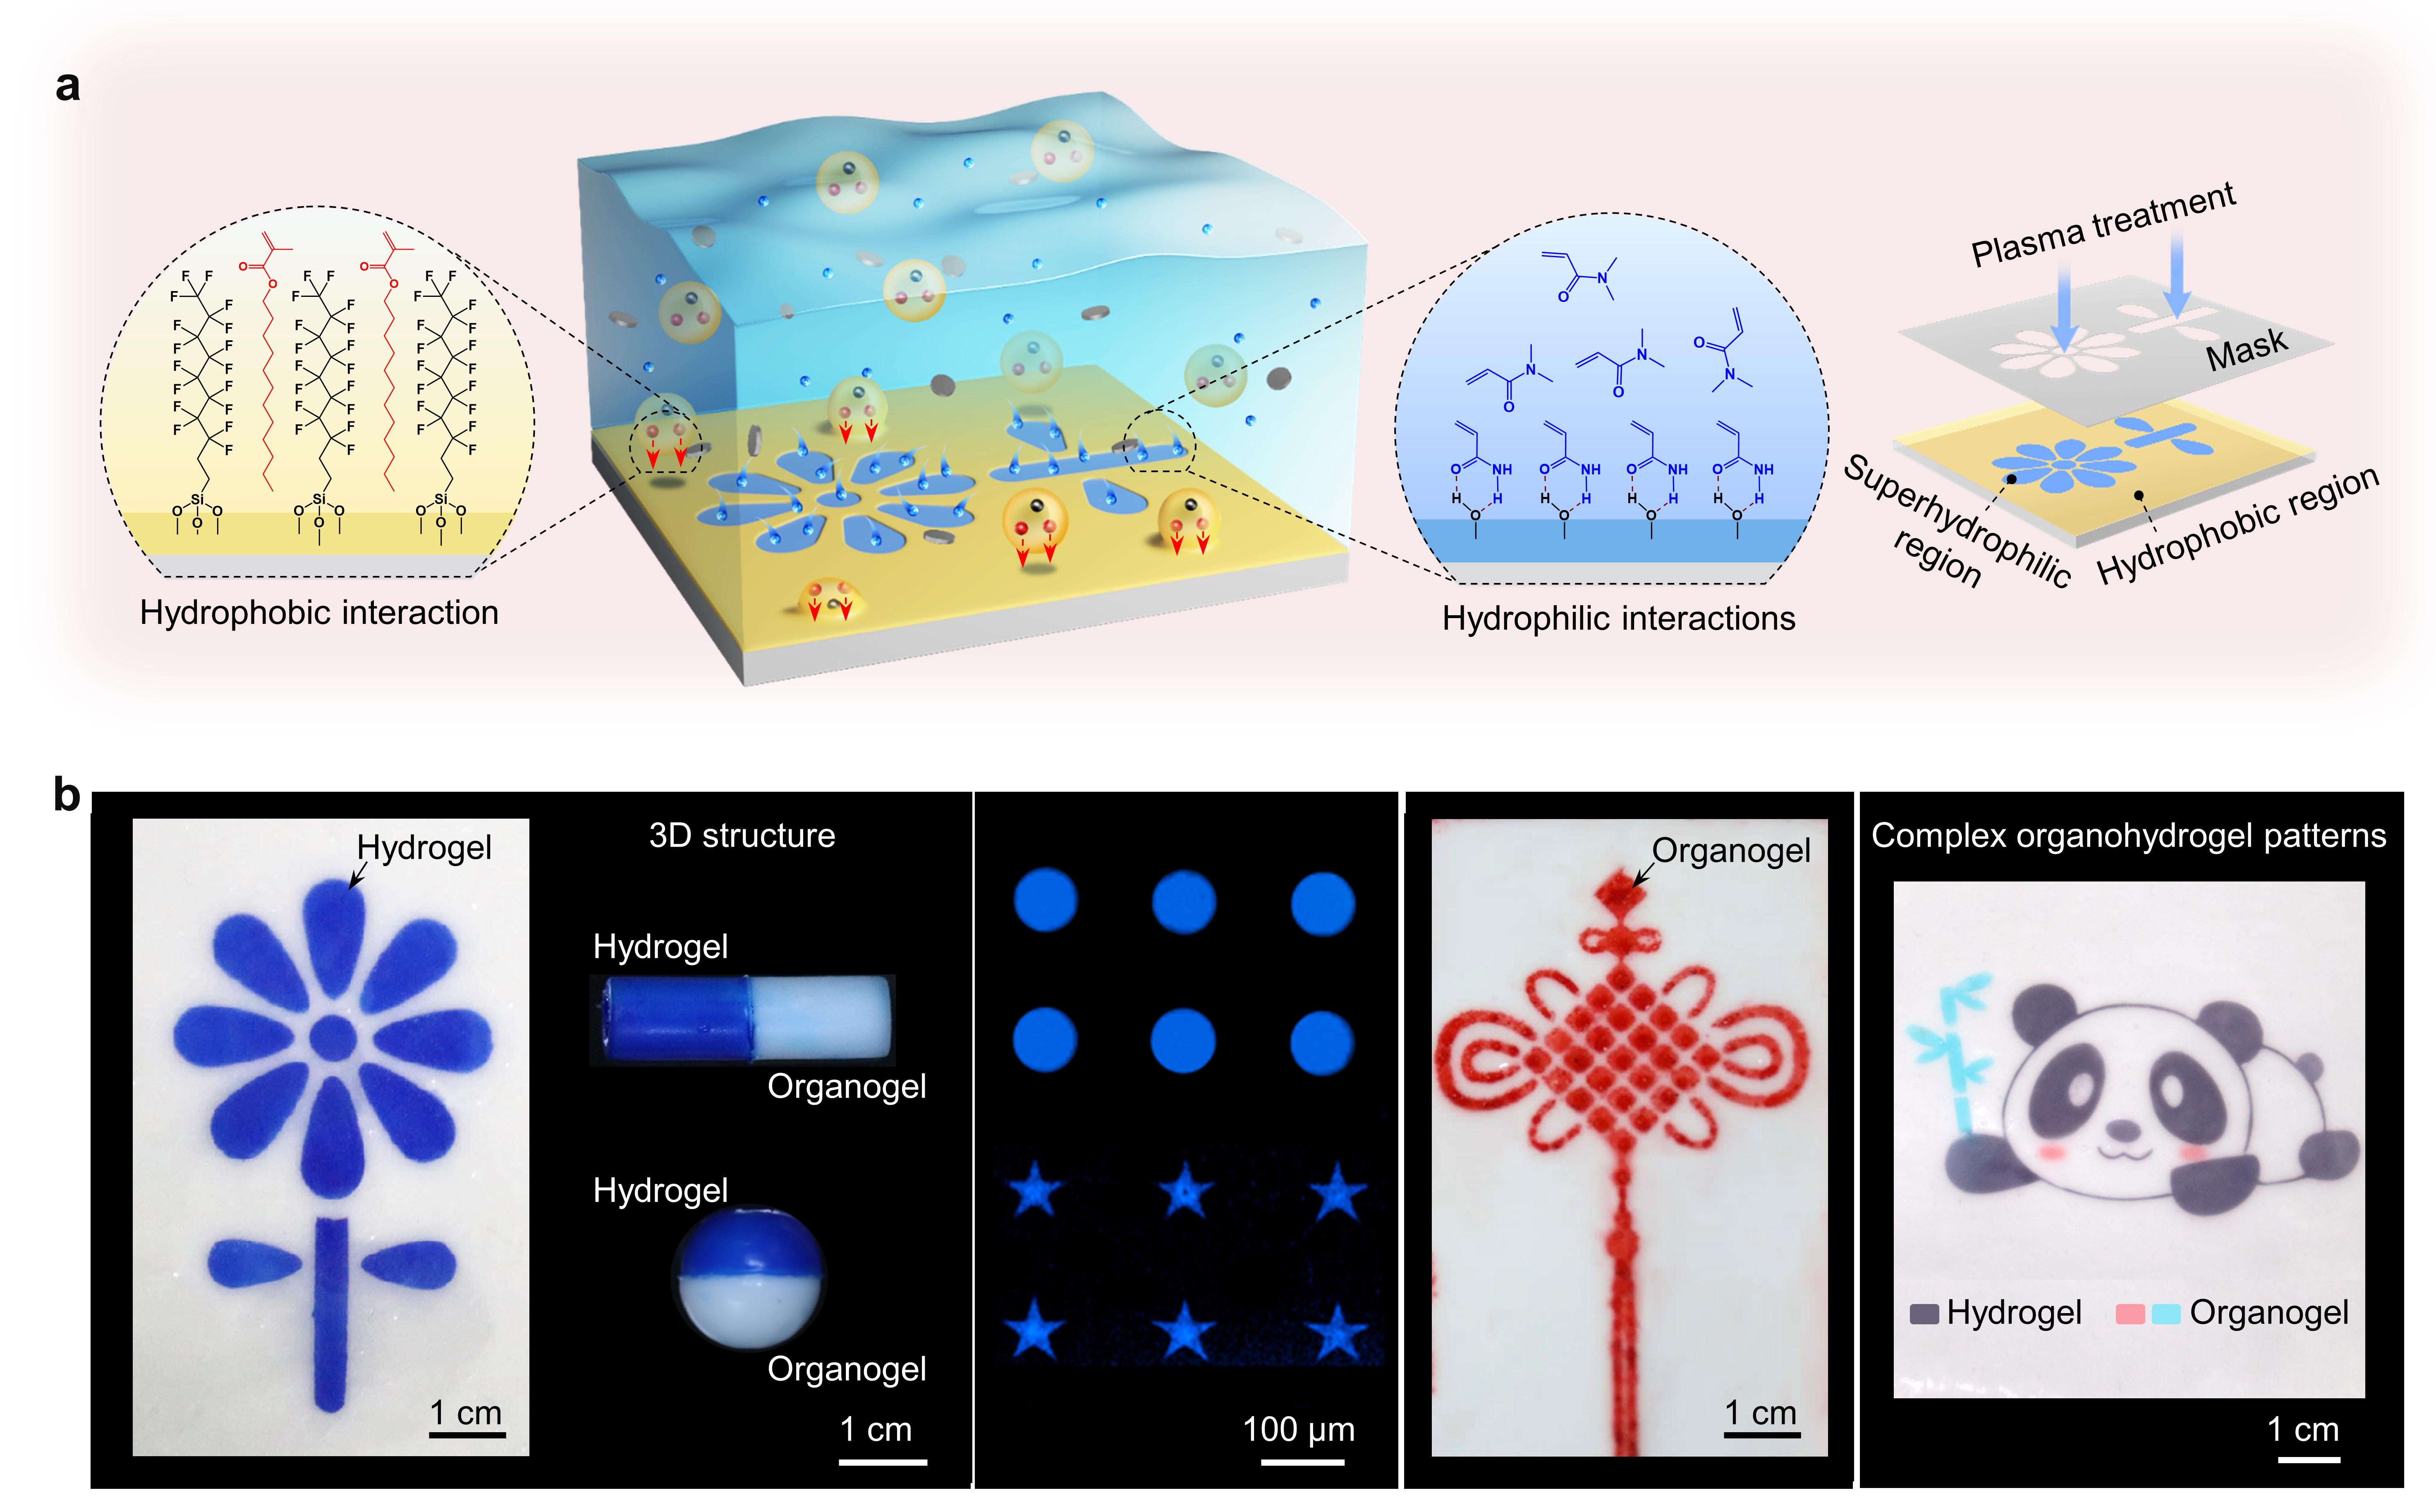 a. Schematic Diagram of the Surface Patterning through a WET strategy; b. Demonstration of Complex Hydrogel and Organogel Patterns on Organohydrogel Surface.jpg